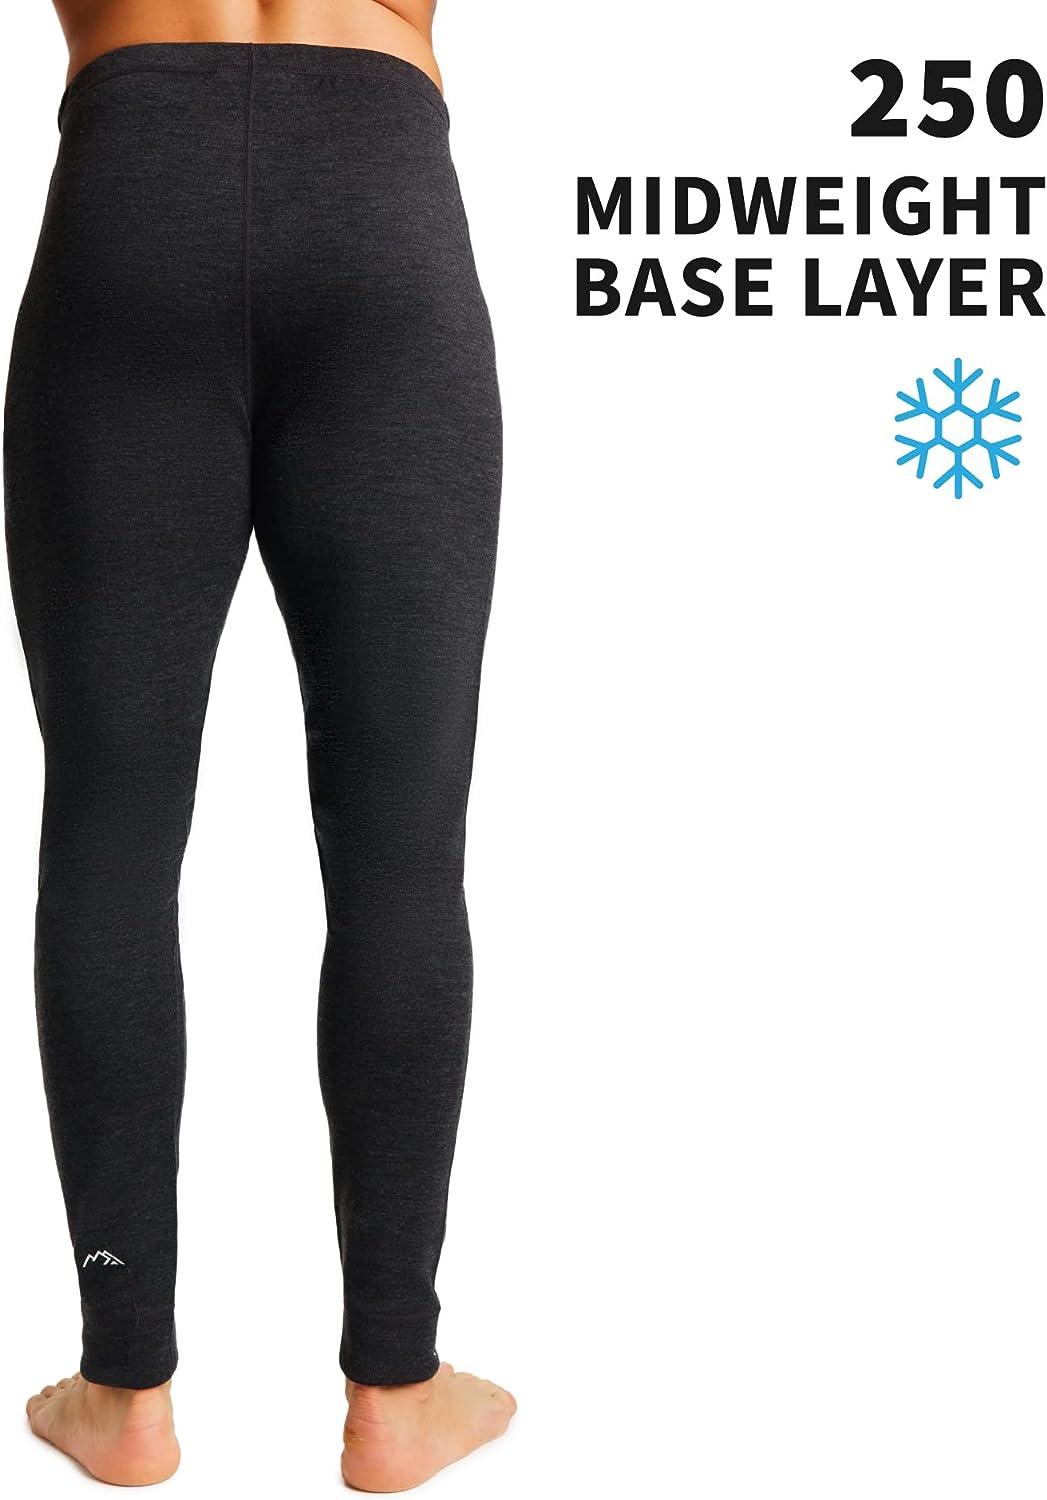 Men's Cool Dry Compression Leggings Thermal Underwear Long Johns